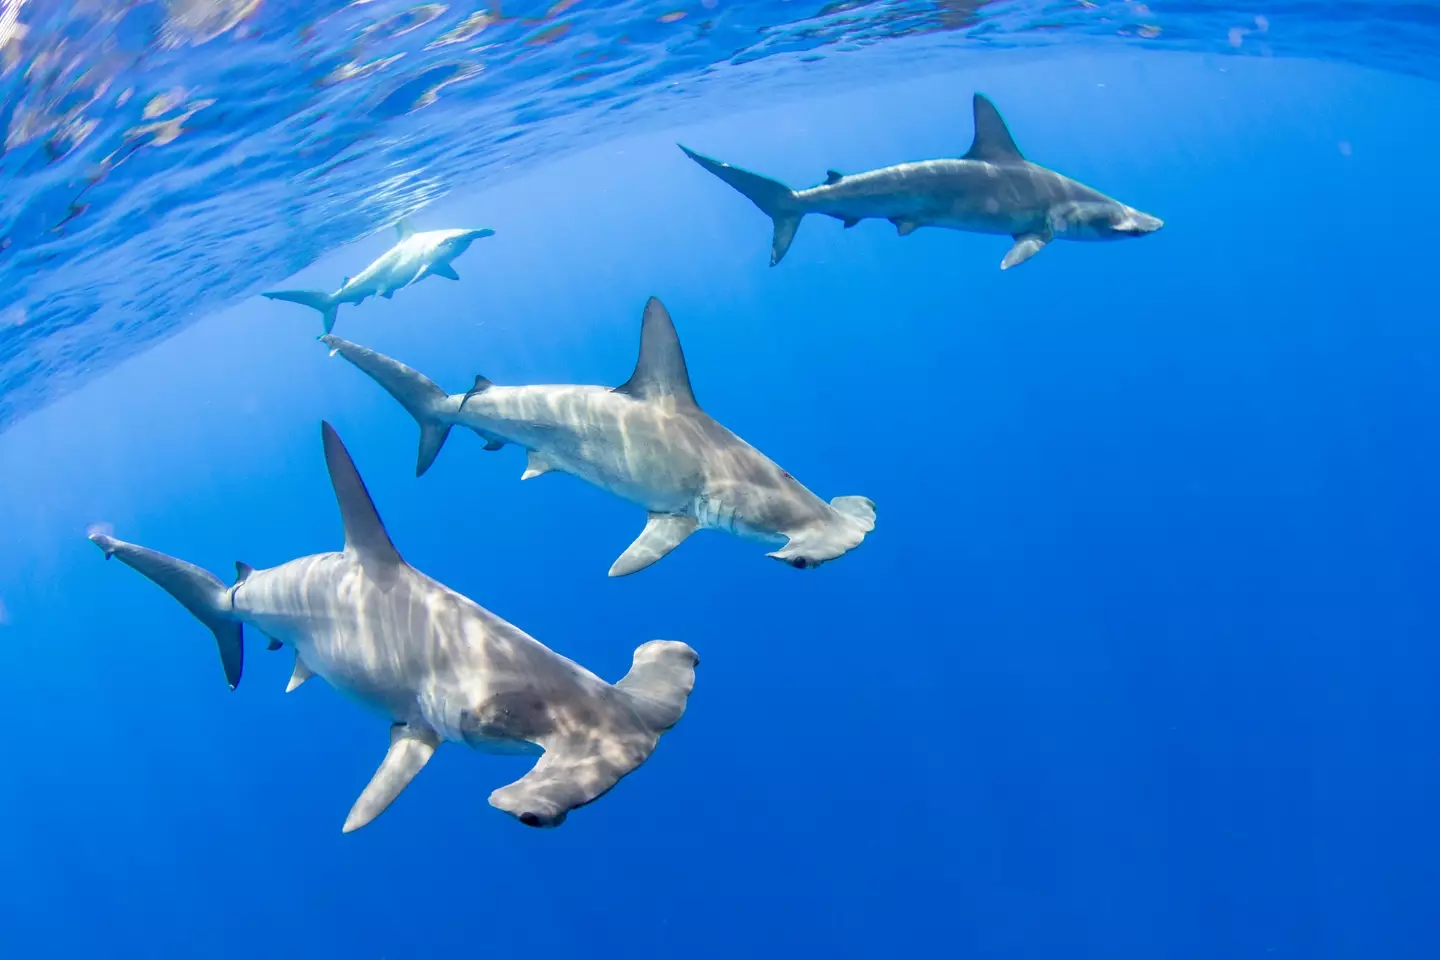 Researchers were shocked to find the volcano was home to sharks.